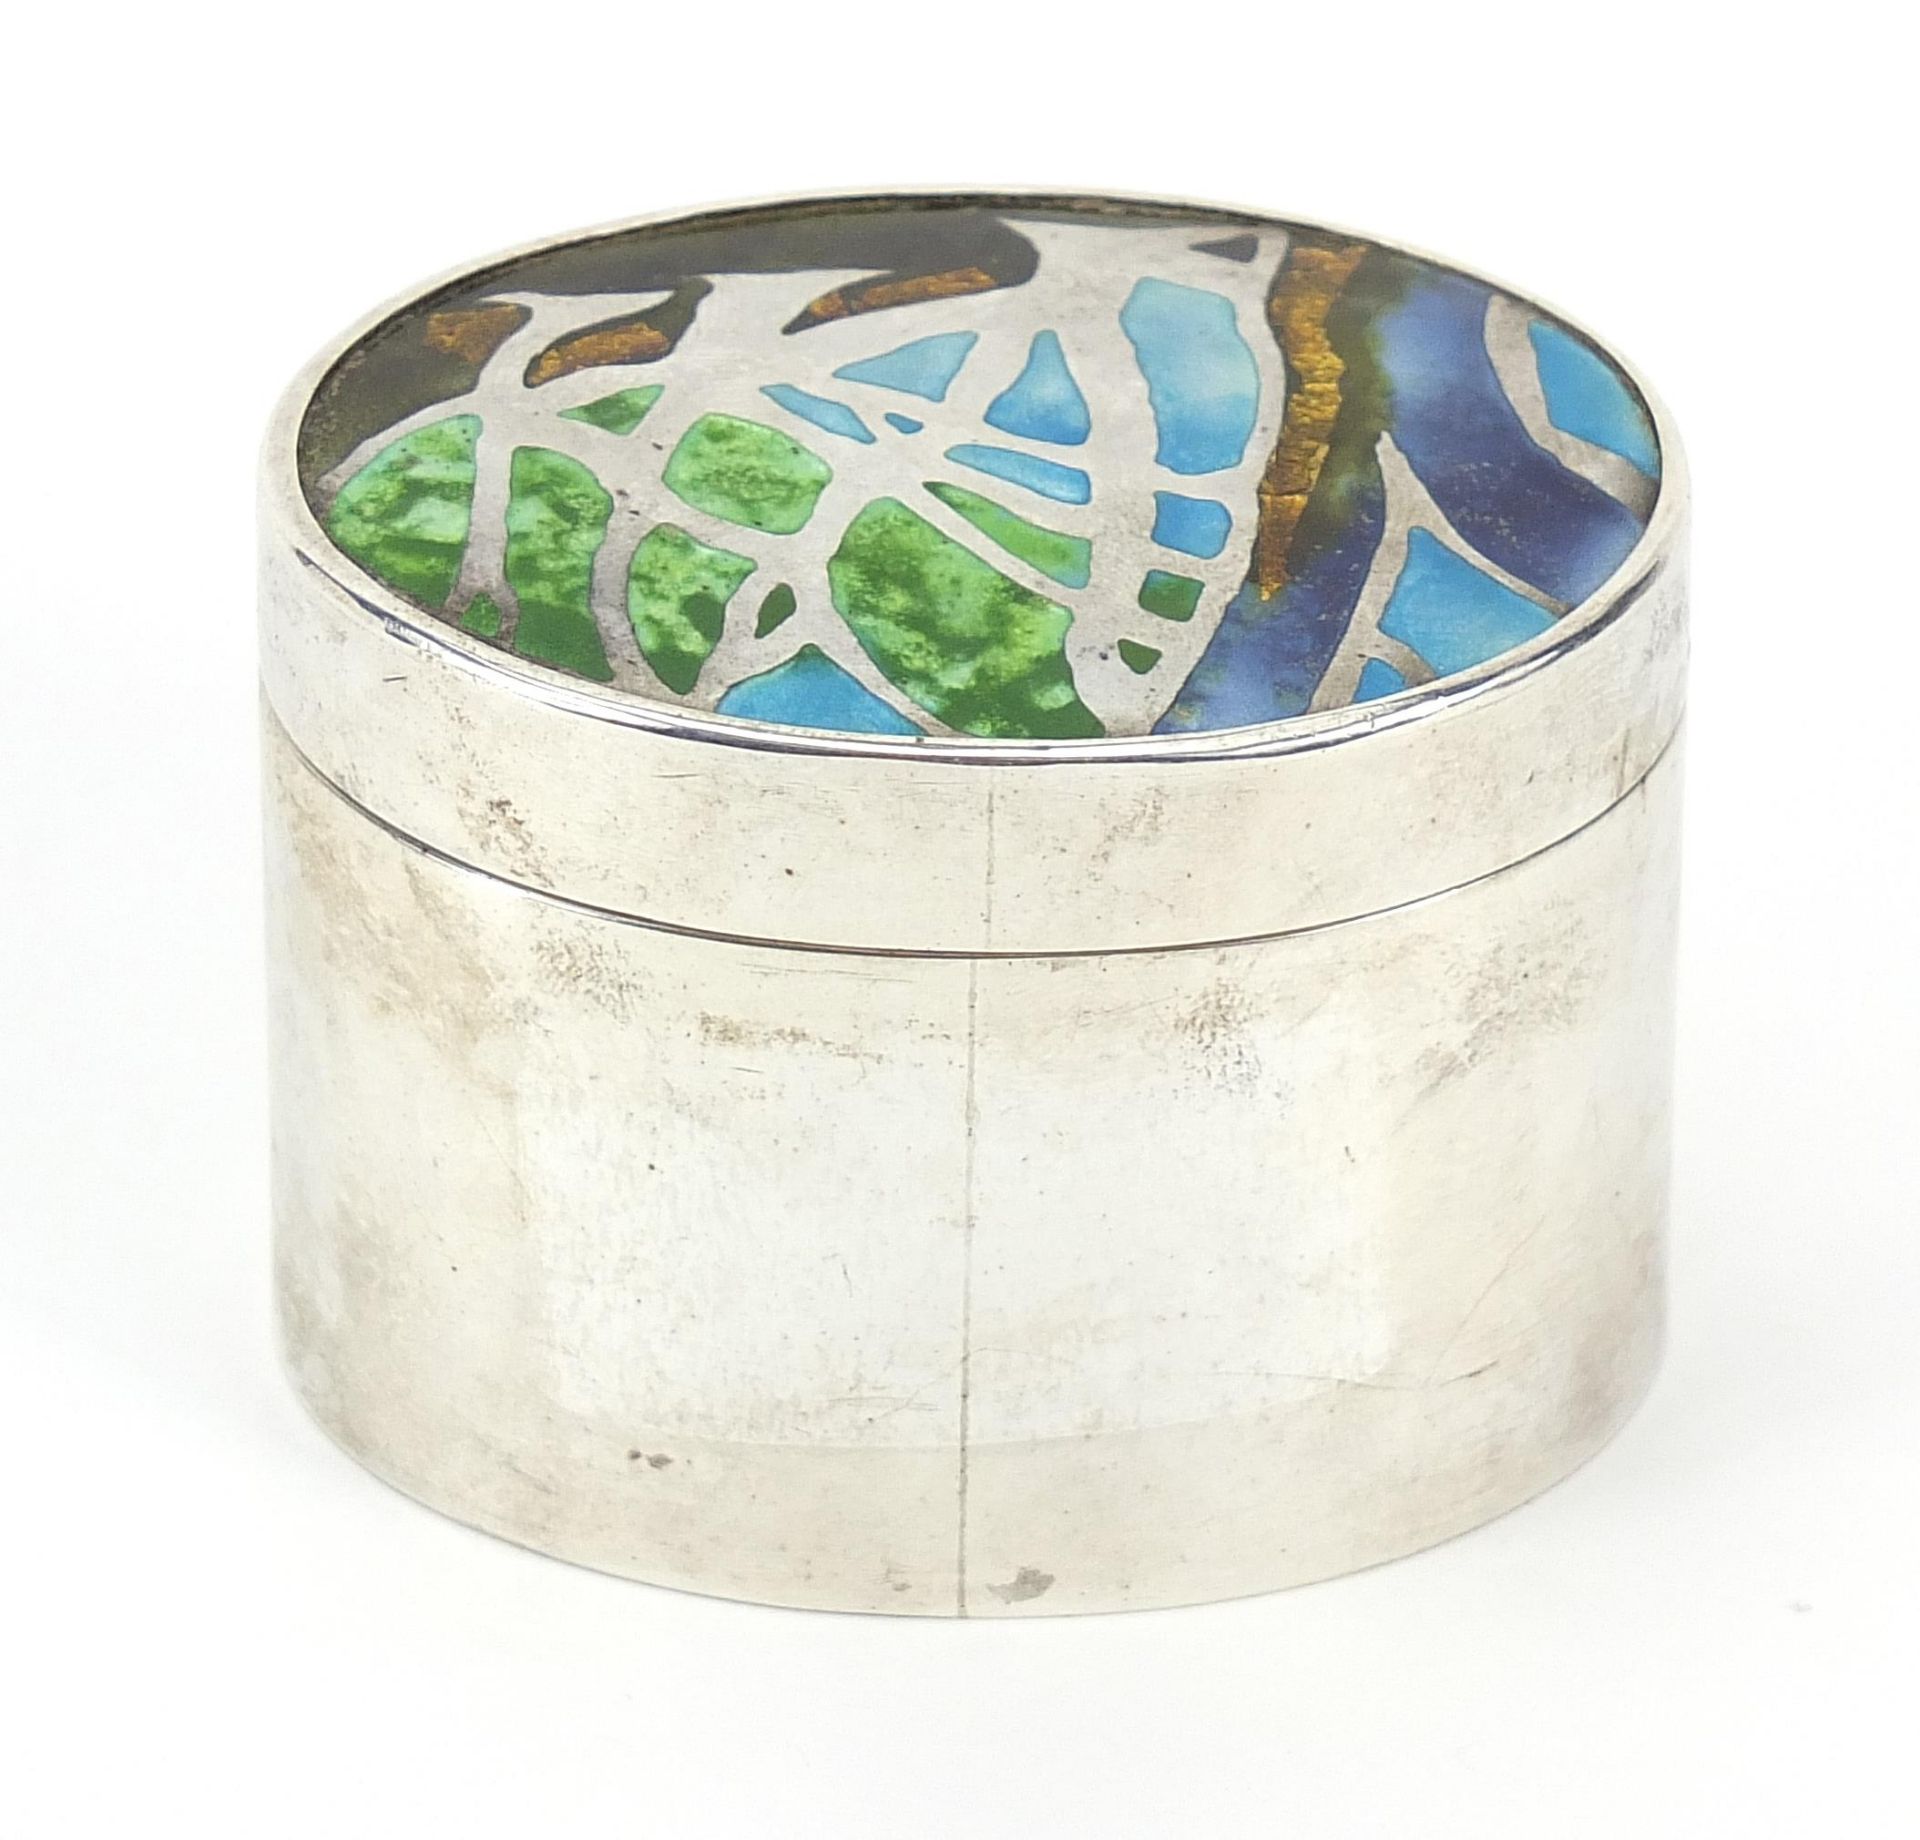 Oval silver box and cover enamelled with stylised trees, JASSO makers mark, London 2000, 5cm high - Image 3 of 5